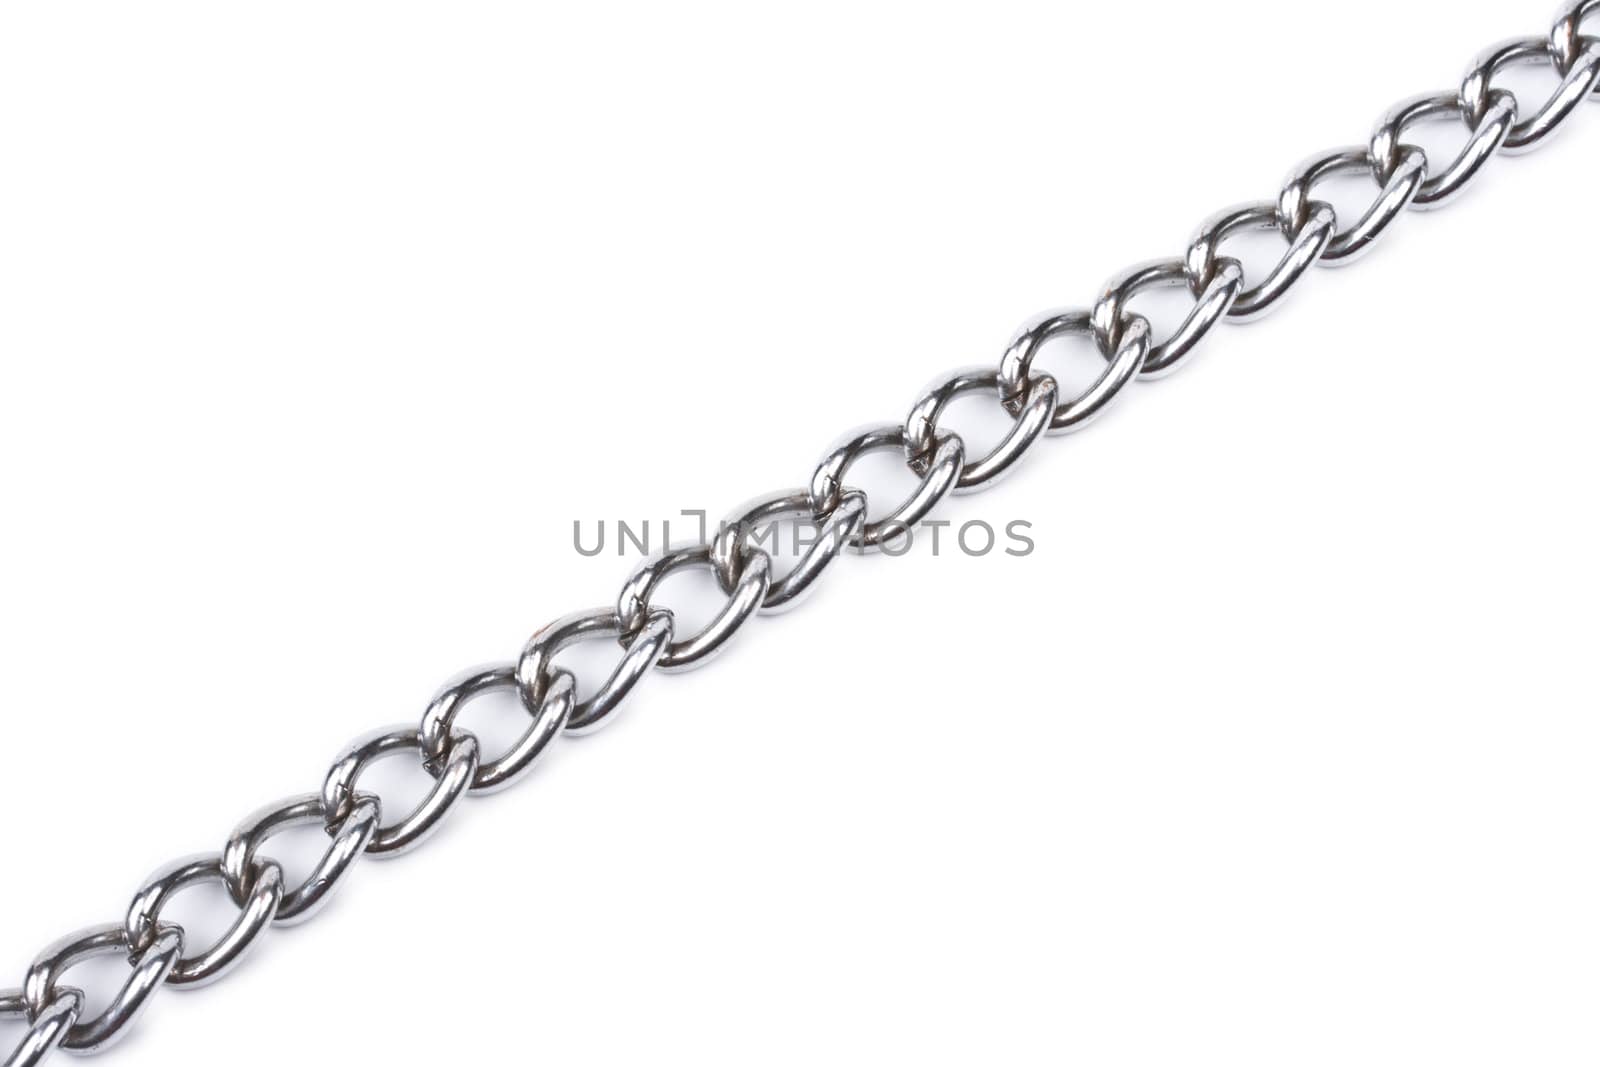 Metal chain isolated on white background